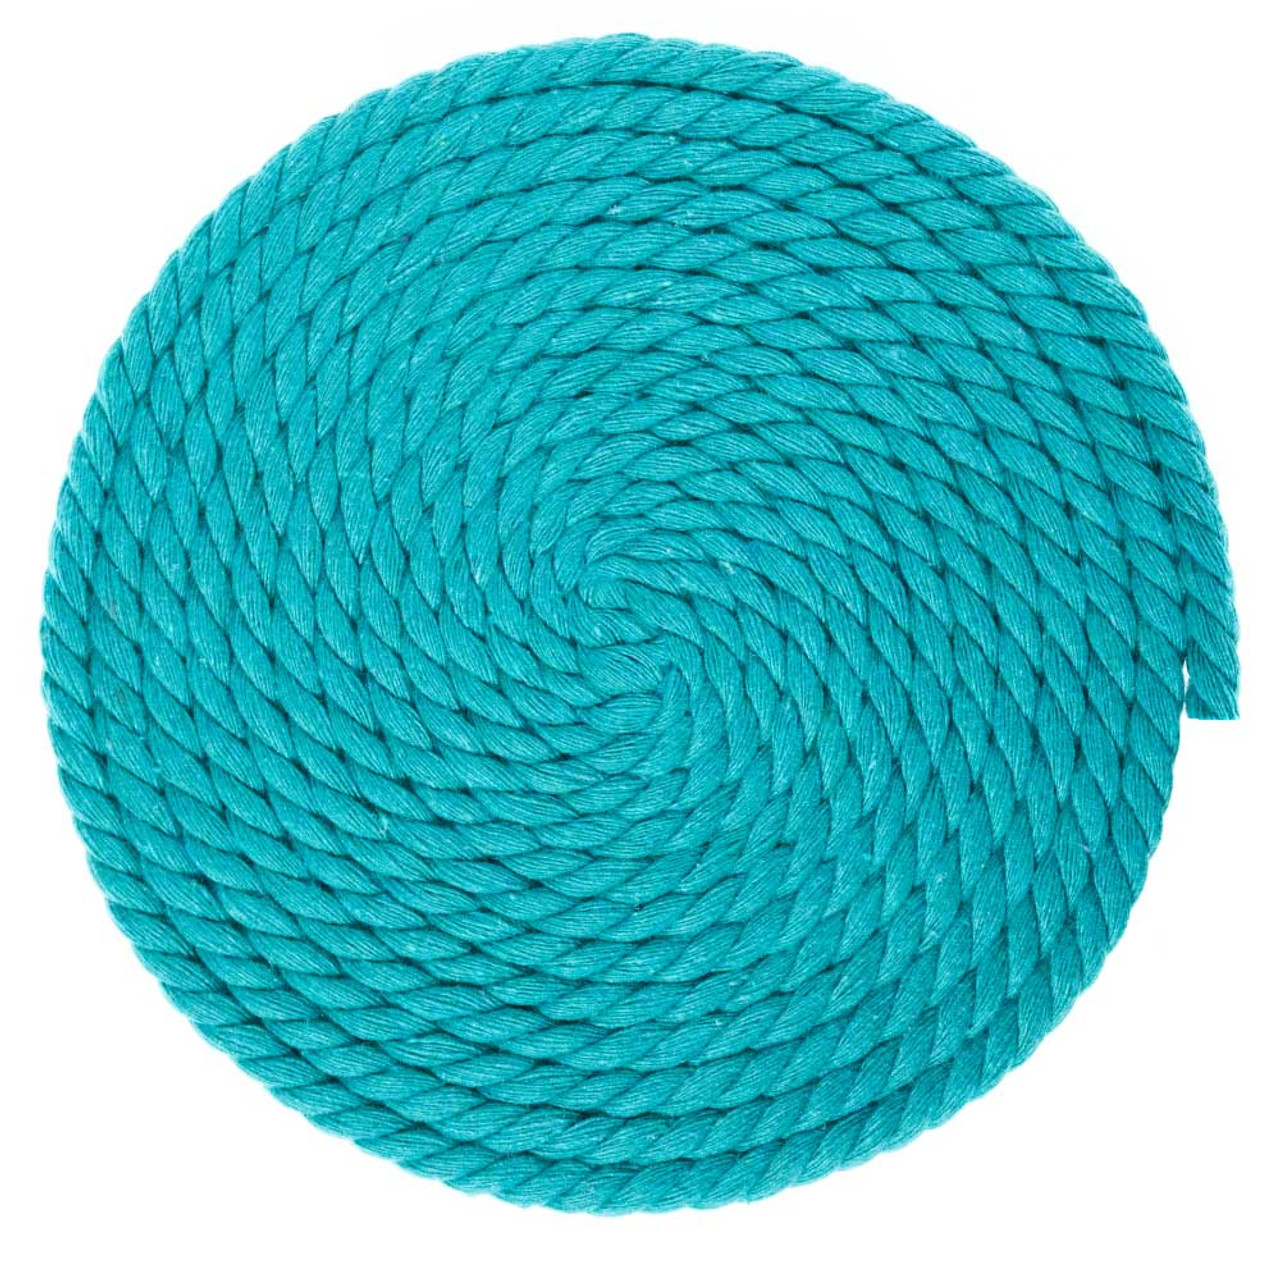 1/4 Inch Twisted Cotton Rope - Teal